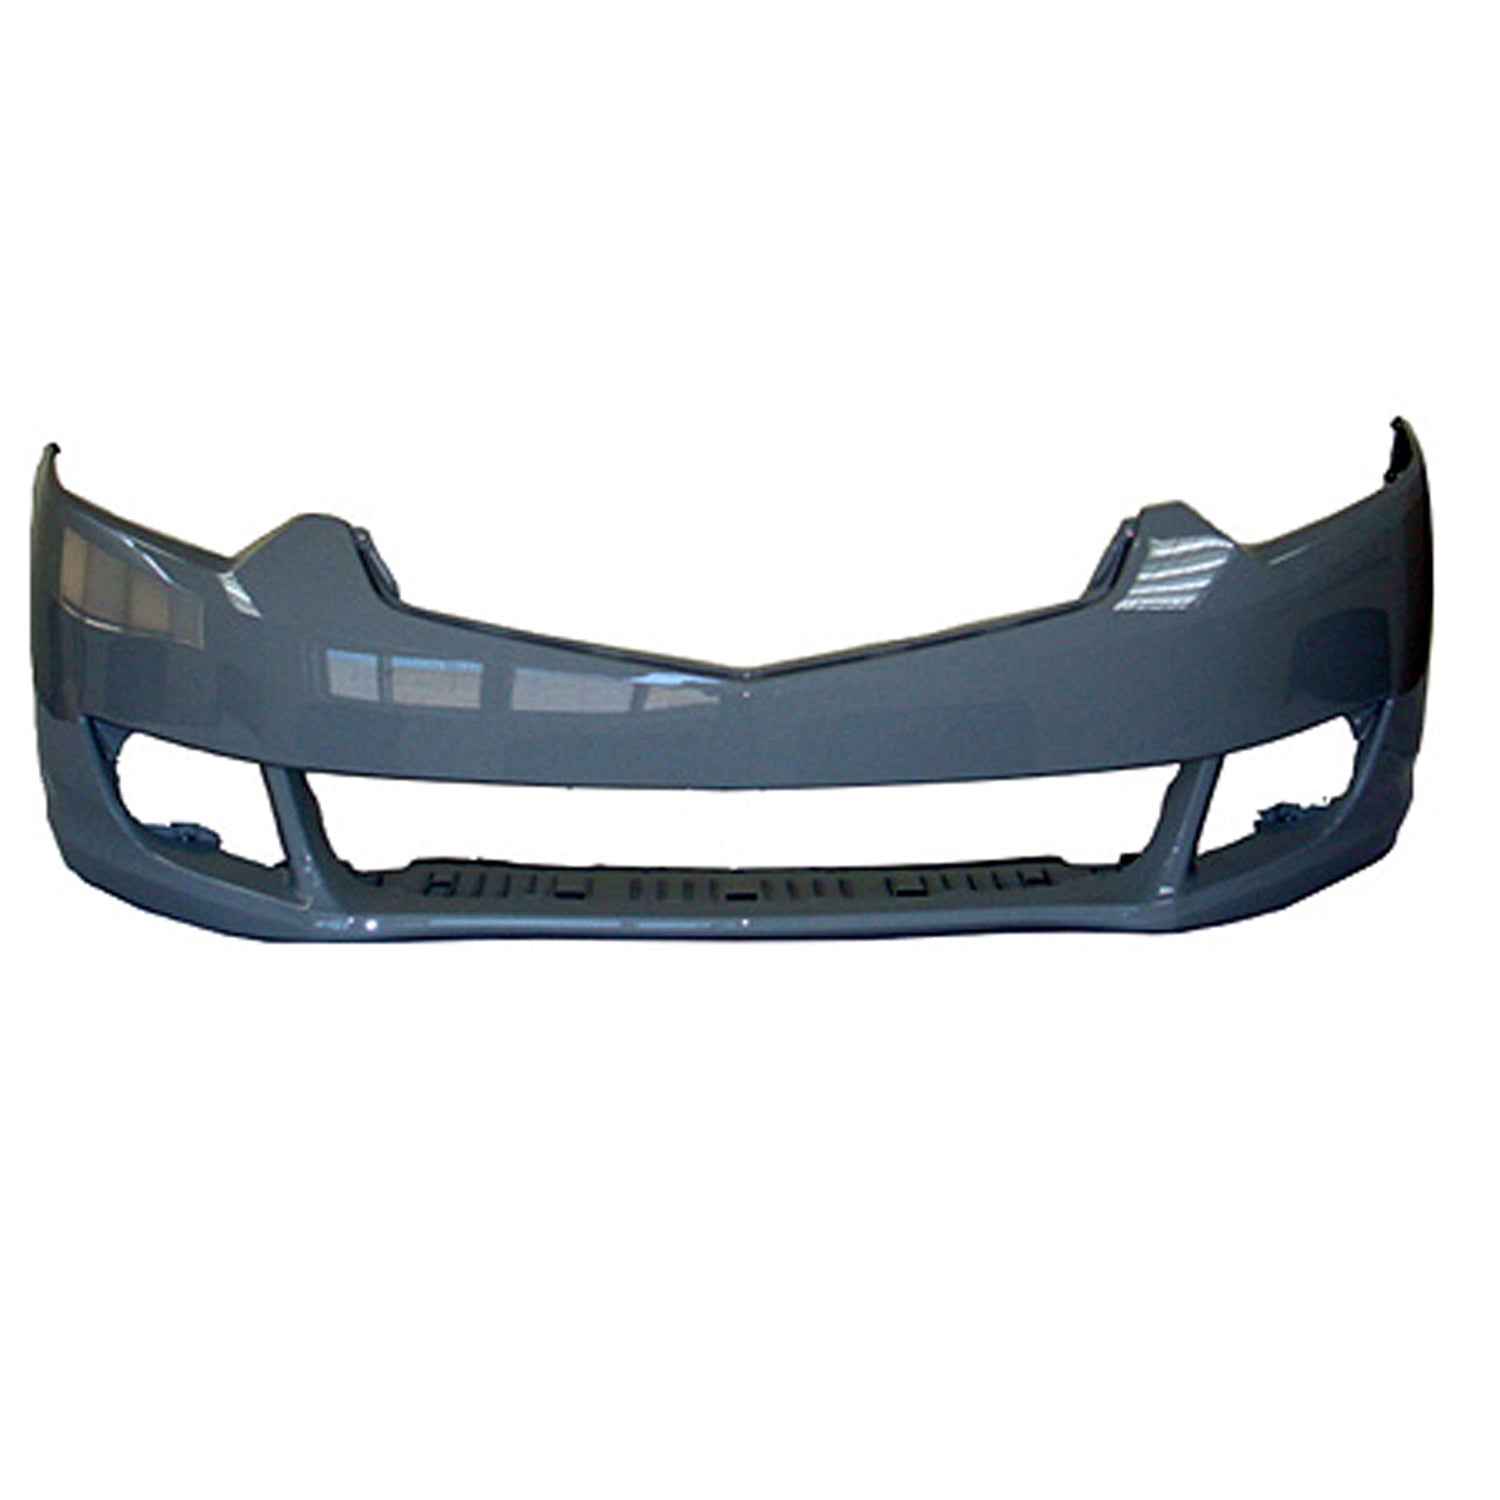 Front bumper cover 2009 - 2010 ACURA TSX CAPA AC1000162PP 04711TL2A90ZZ